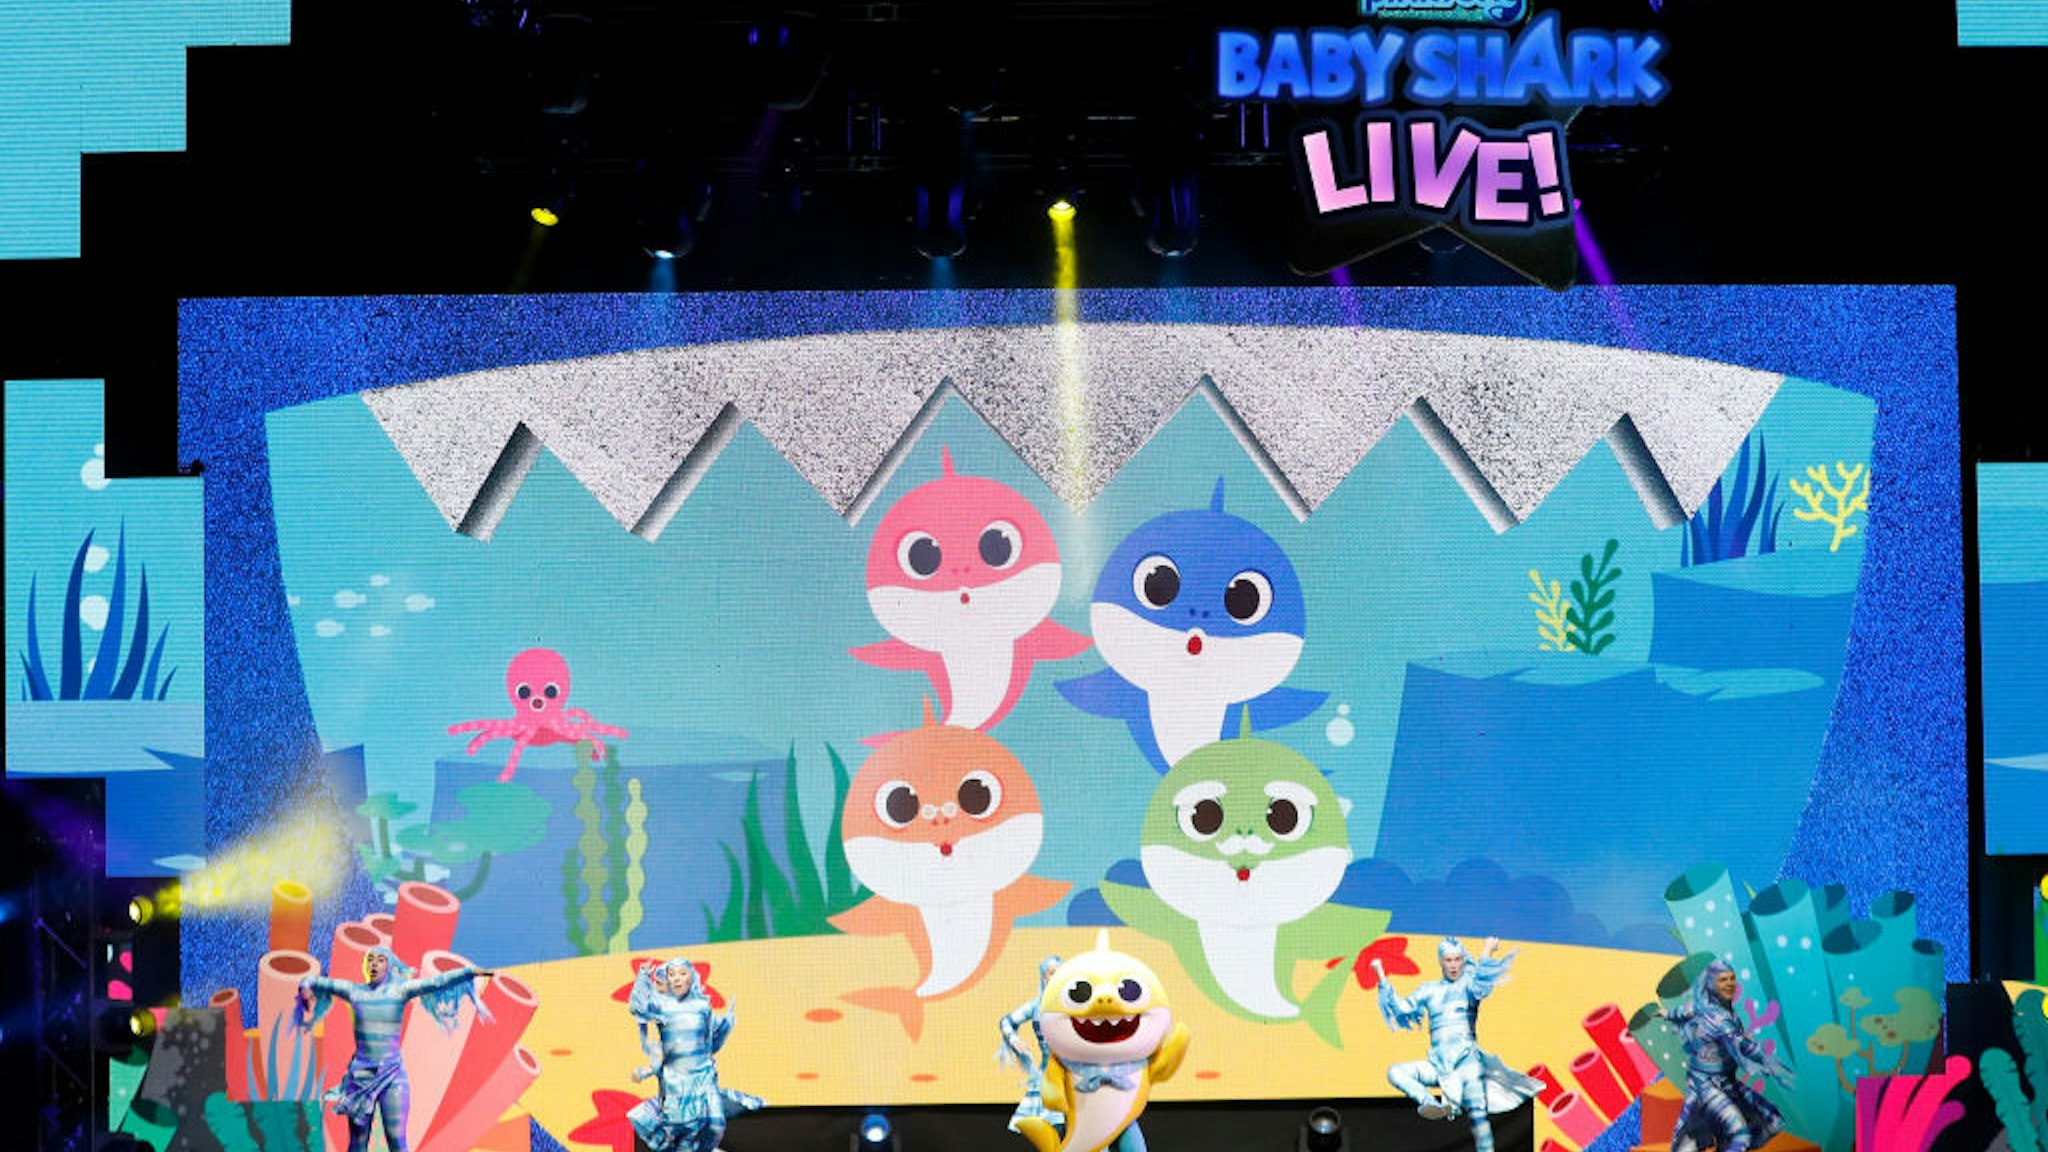 Baby Shark performs during "Pinkfong Baby Shark Live!" presented by Pinkfong at Kings Theatre on November 08, 2019 in Brooklyn, New York